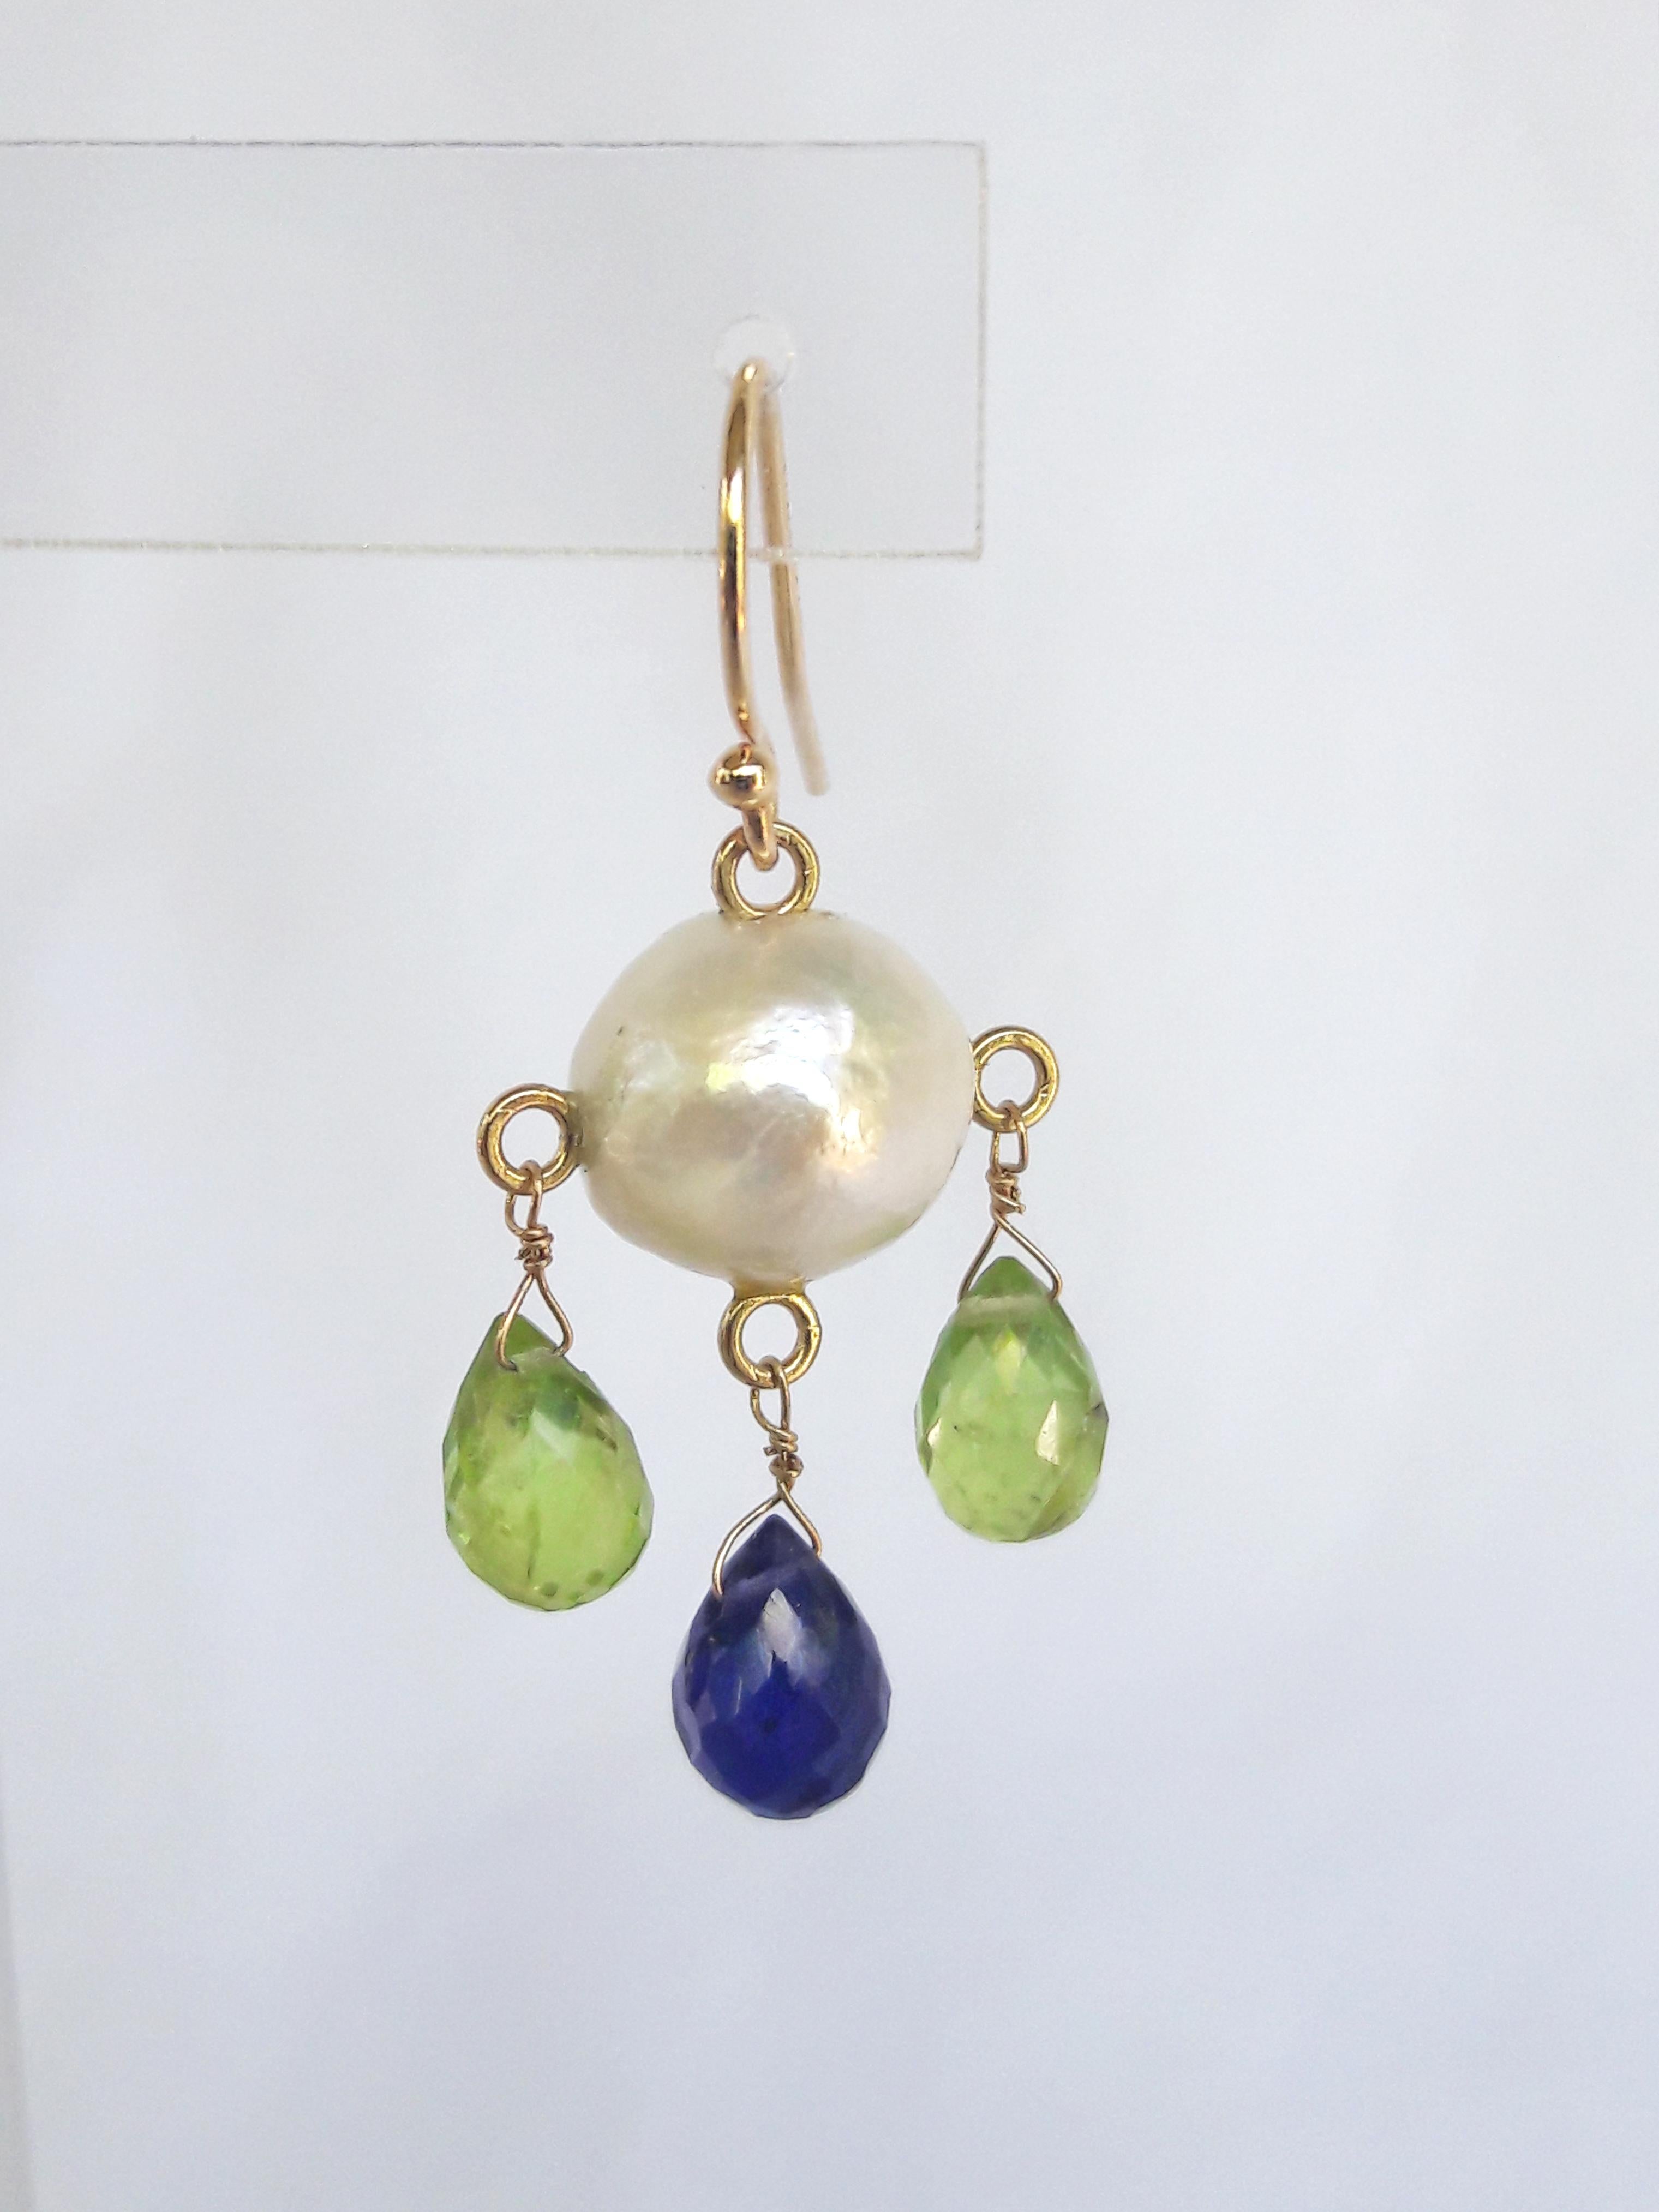 These white pearl earring with iolite and peridot drops and 14k yellow gold hooks are hand made by Marina J. The round white pearl is beautiful with slight imperfections that add to the detail of these earrings. Hanging from the white pearl are